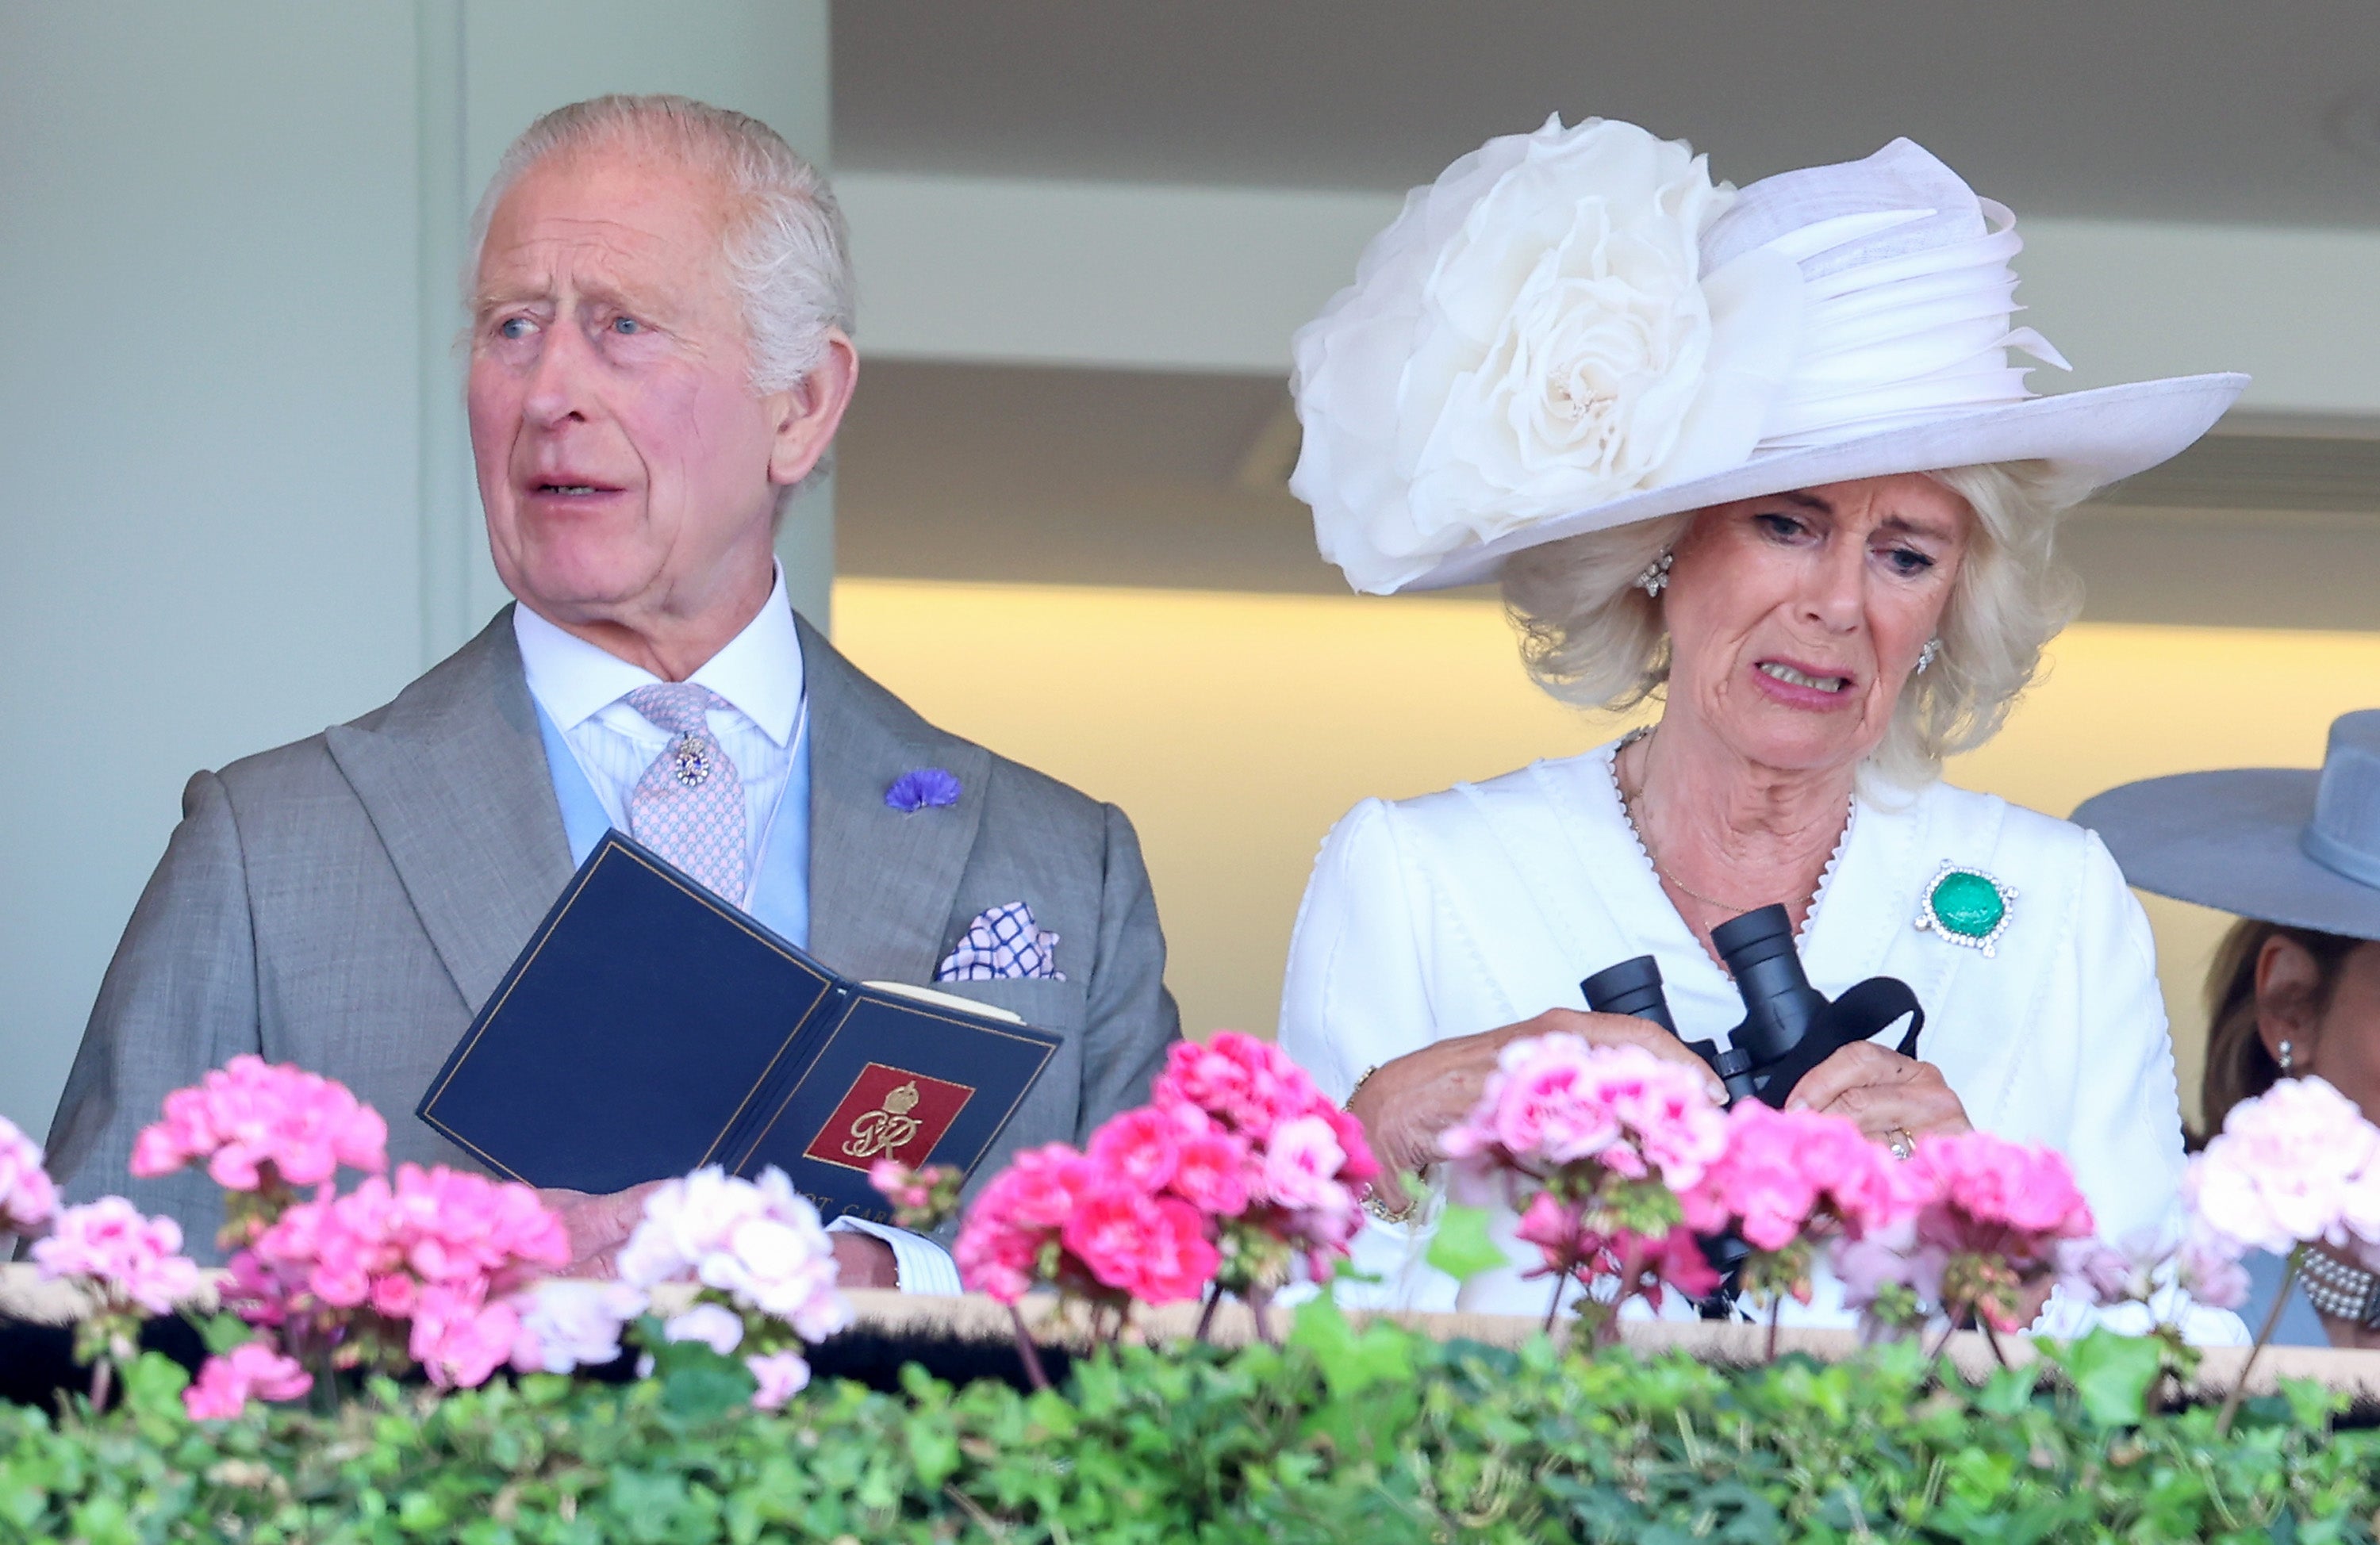 The Queen was very expressive on the third day of Royal Ascot.